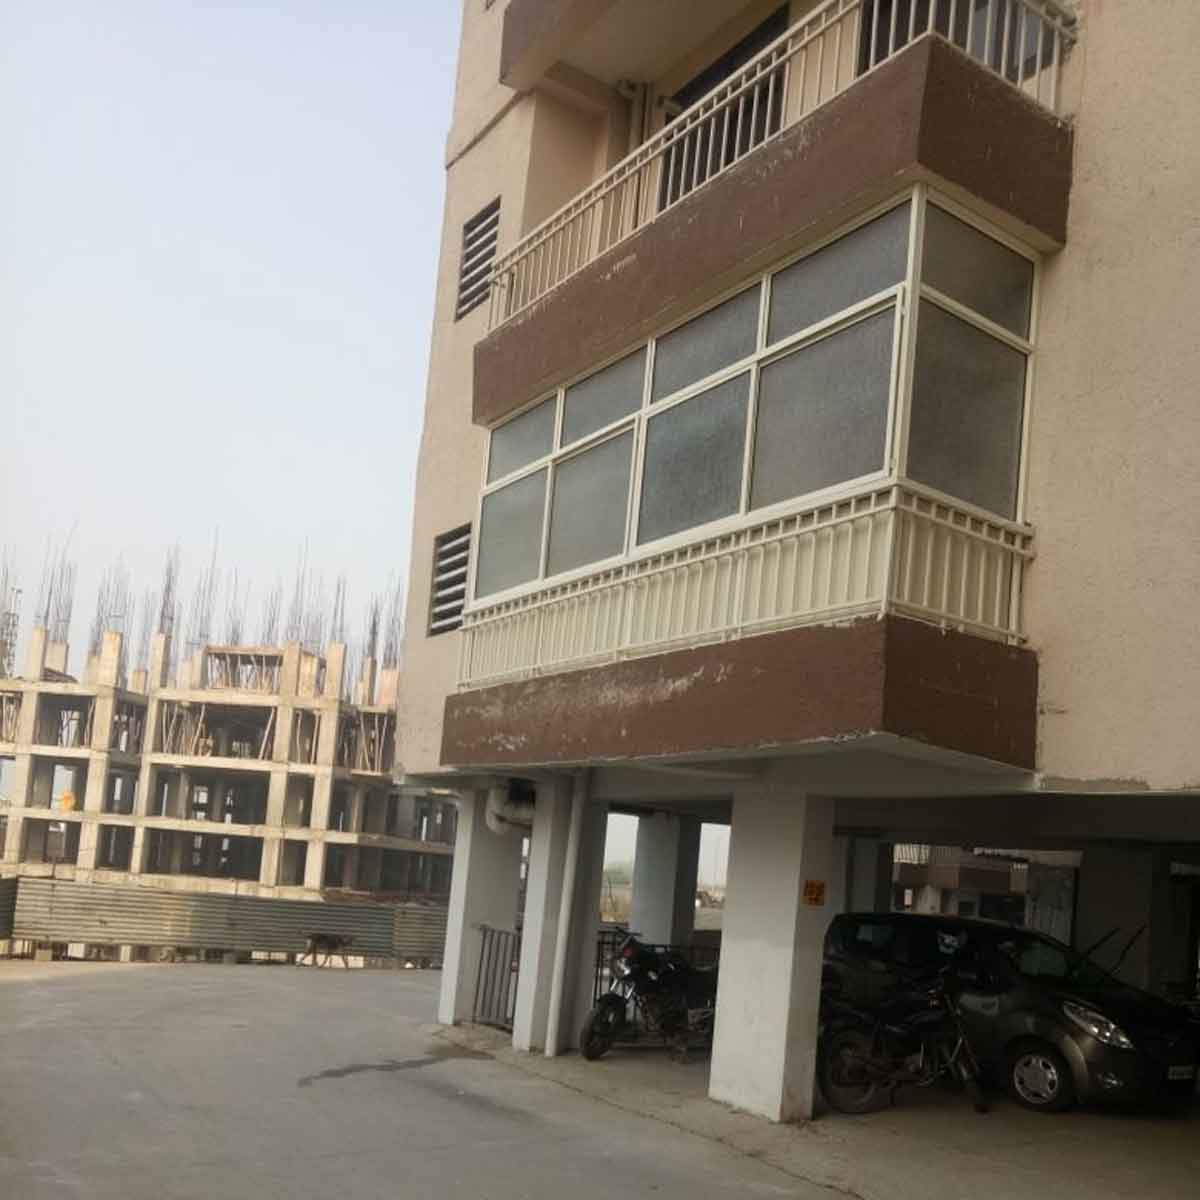 UPVC Aluminium Balcony Covering Manufacturers, Suppliers in Nagda